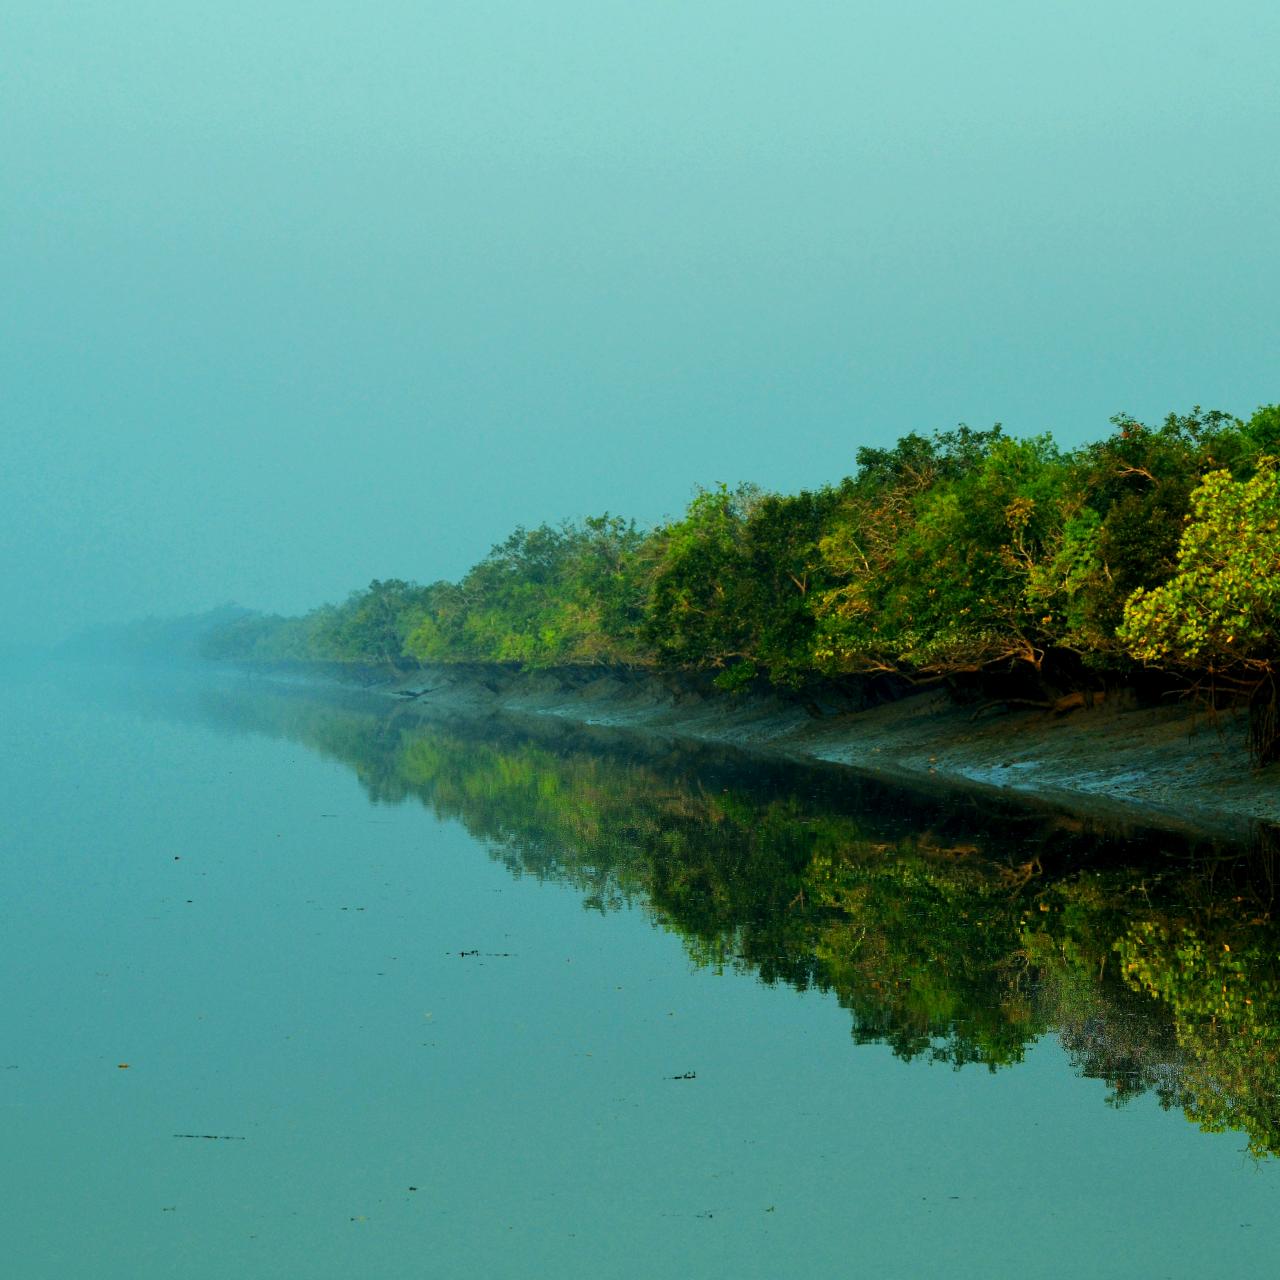 Bengal tigers: unsung heroes of the Sundarbans Mangroves